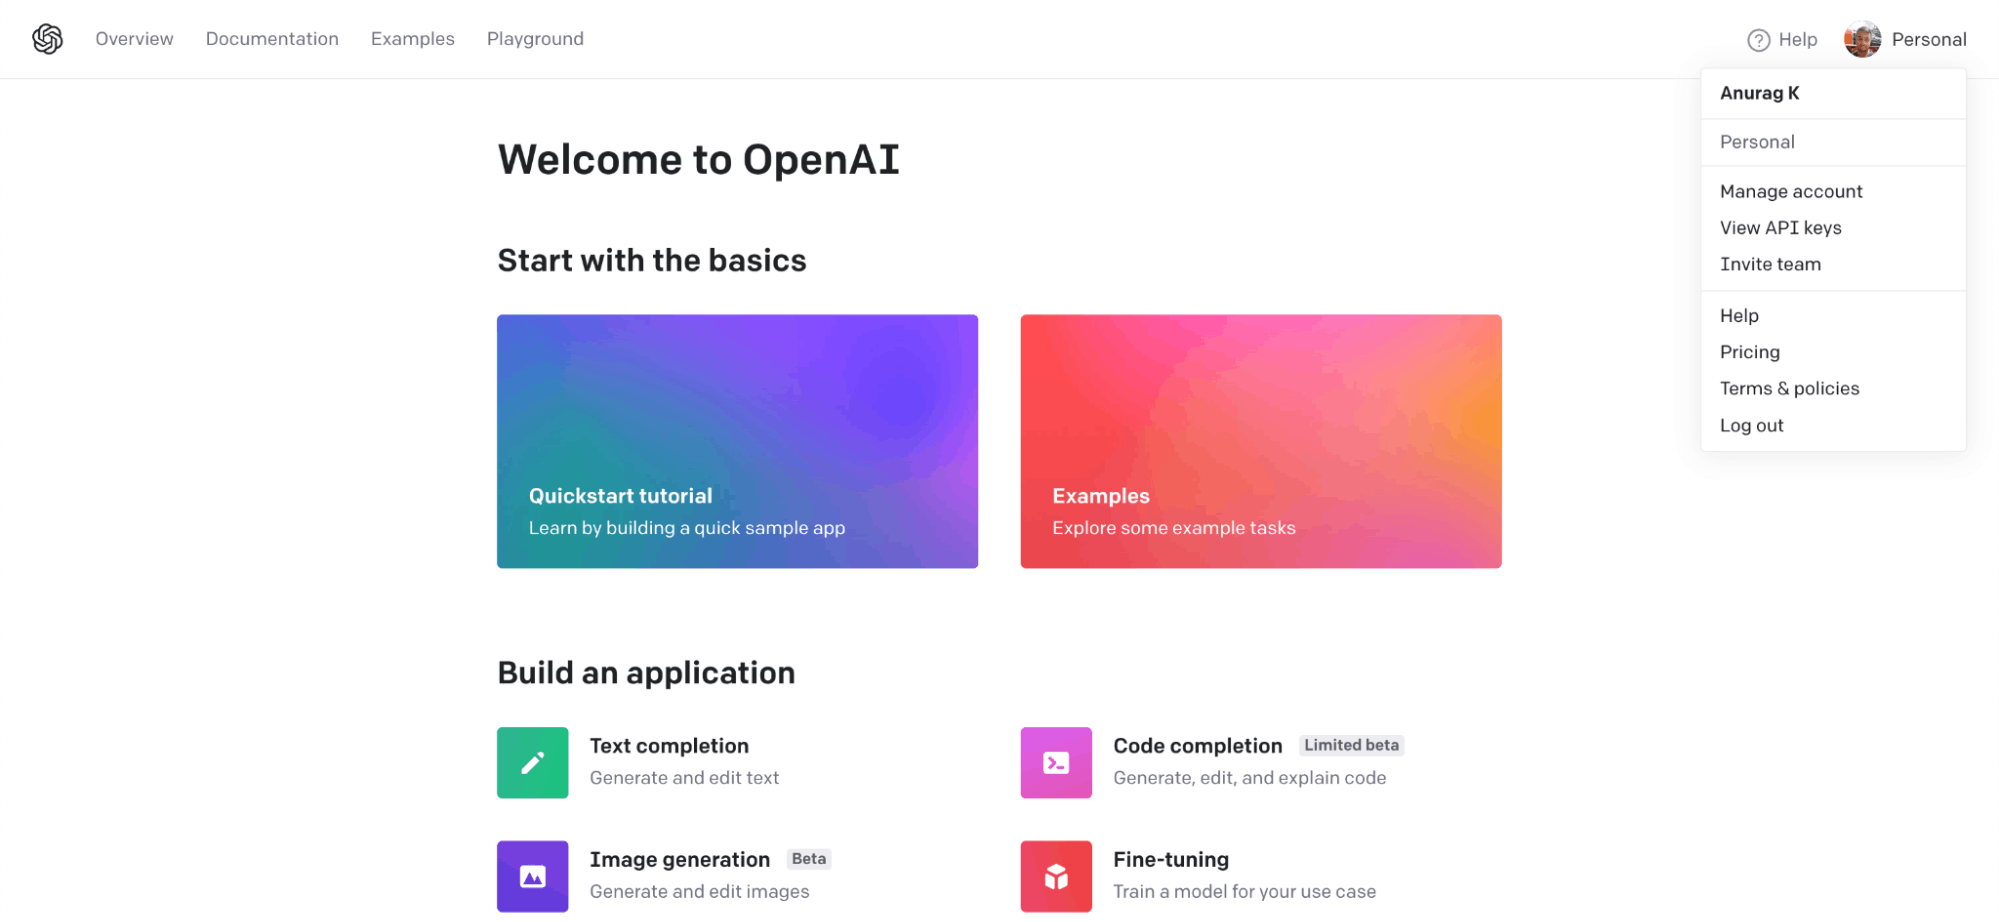 Image of the OpenAI page.